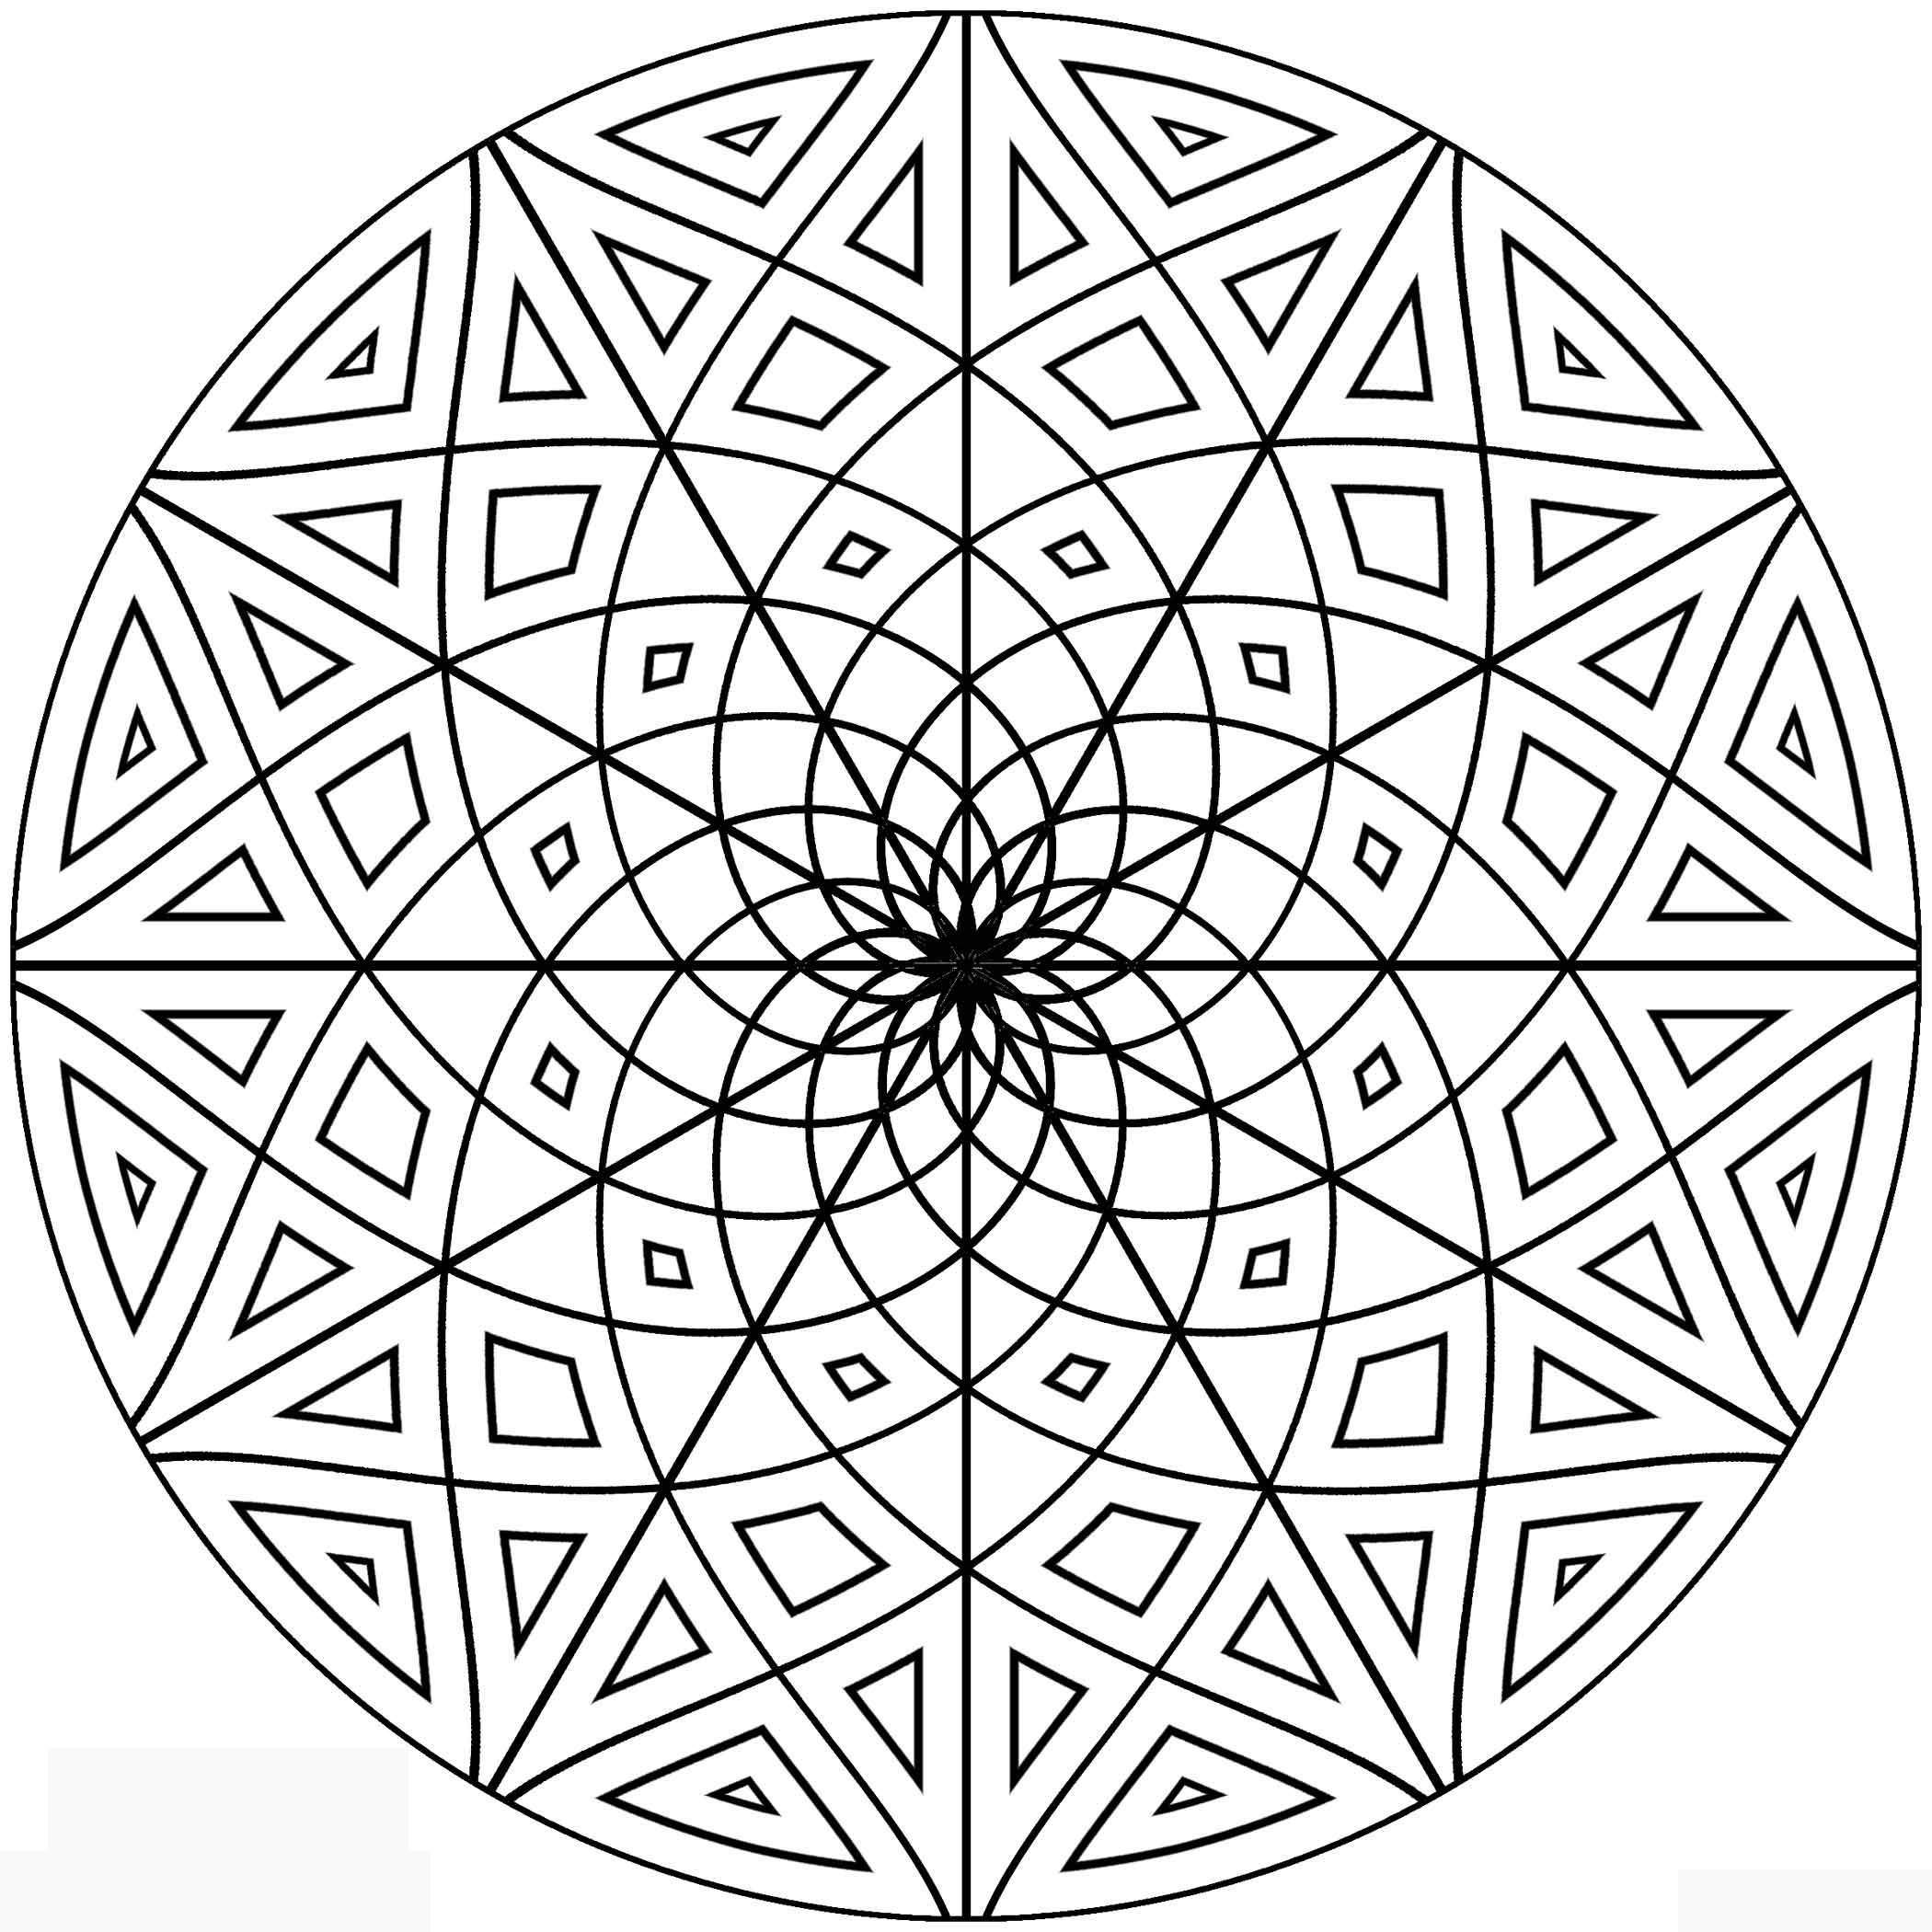 Coloring Pages To Print
 Free Printable Geometric Coloring Pages for Adults